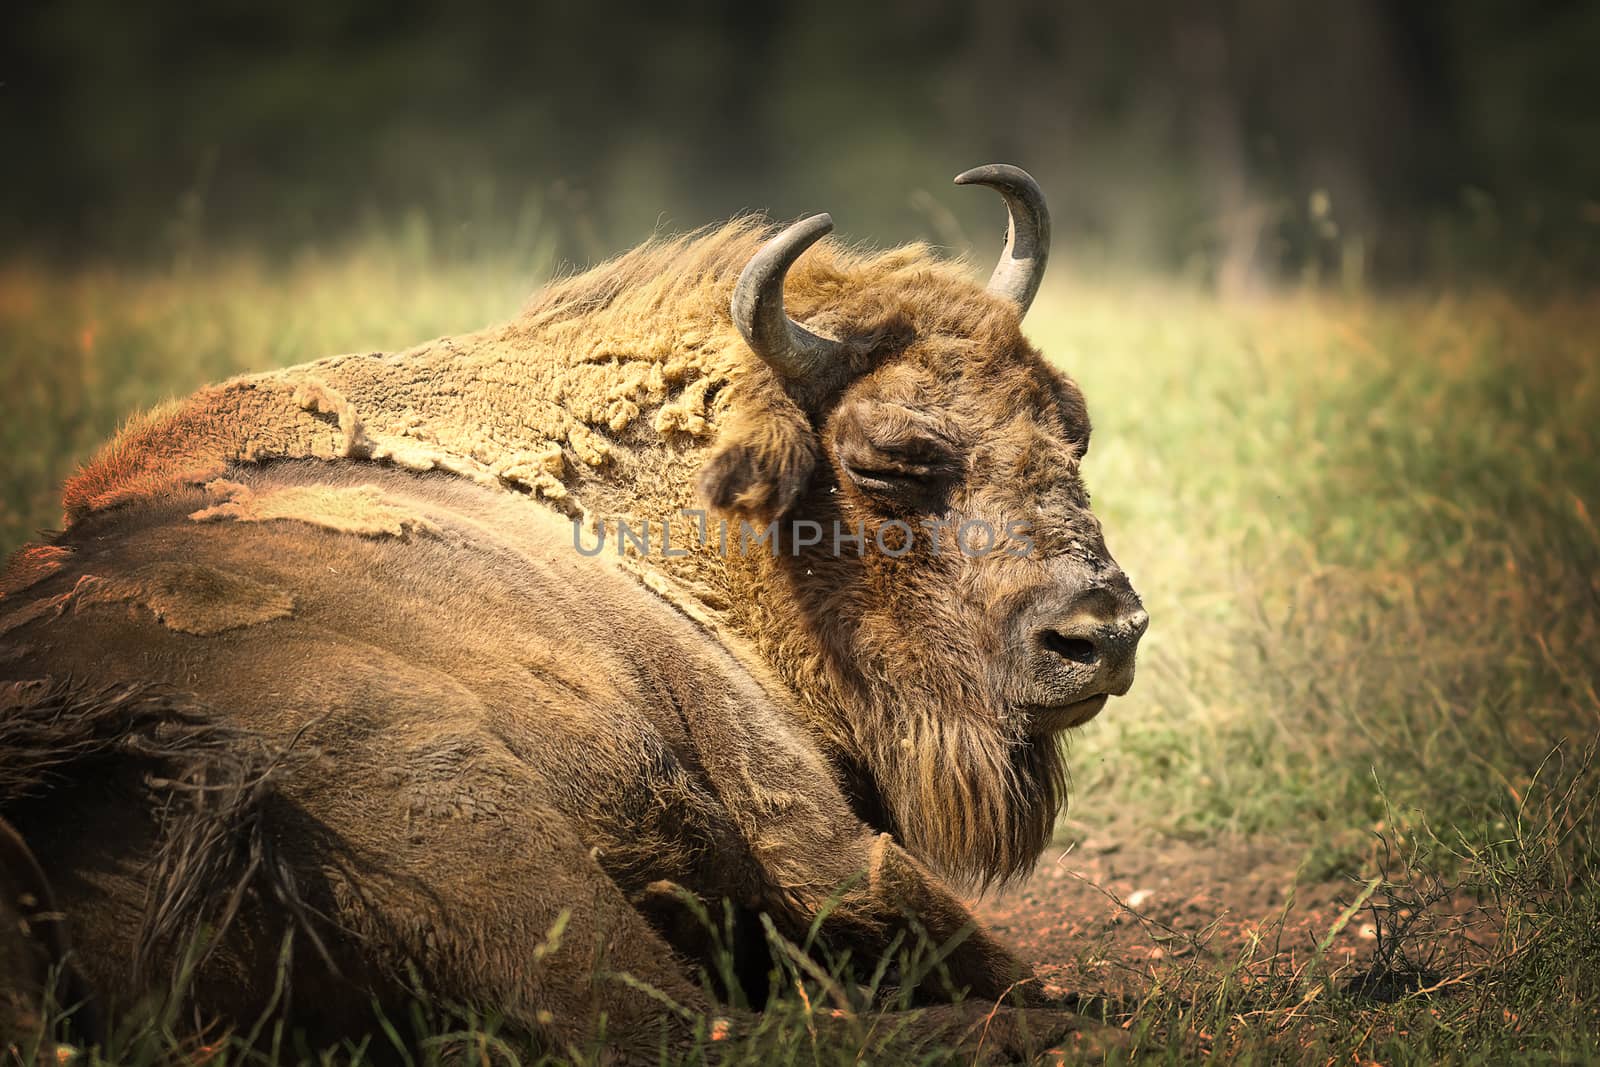 large european bison resting on ground by taviphoto